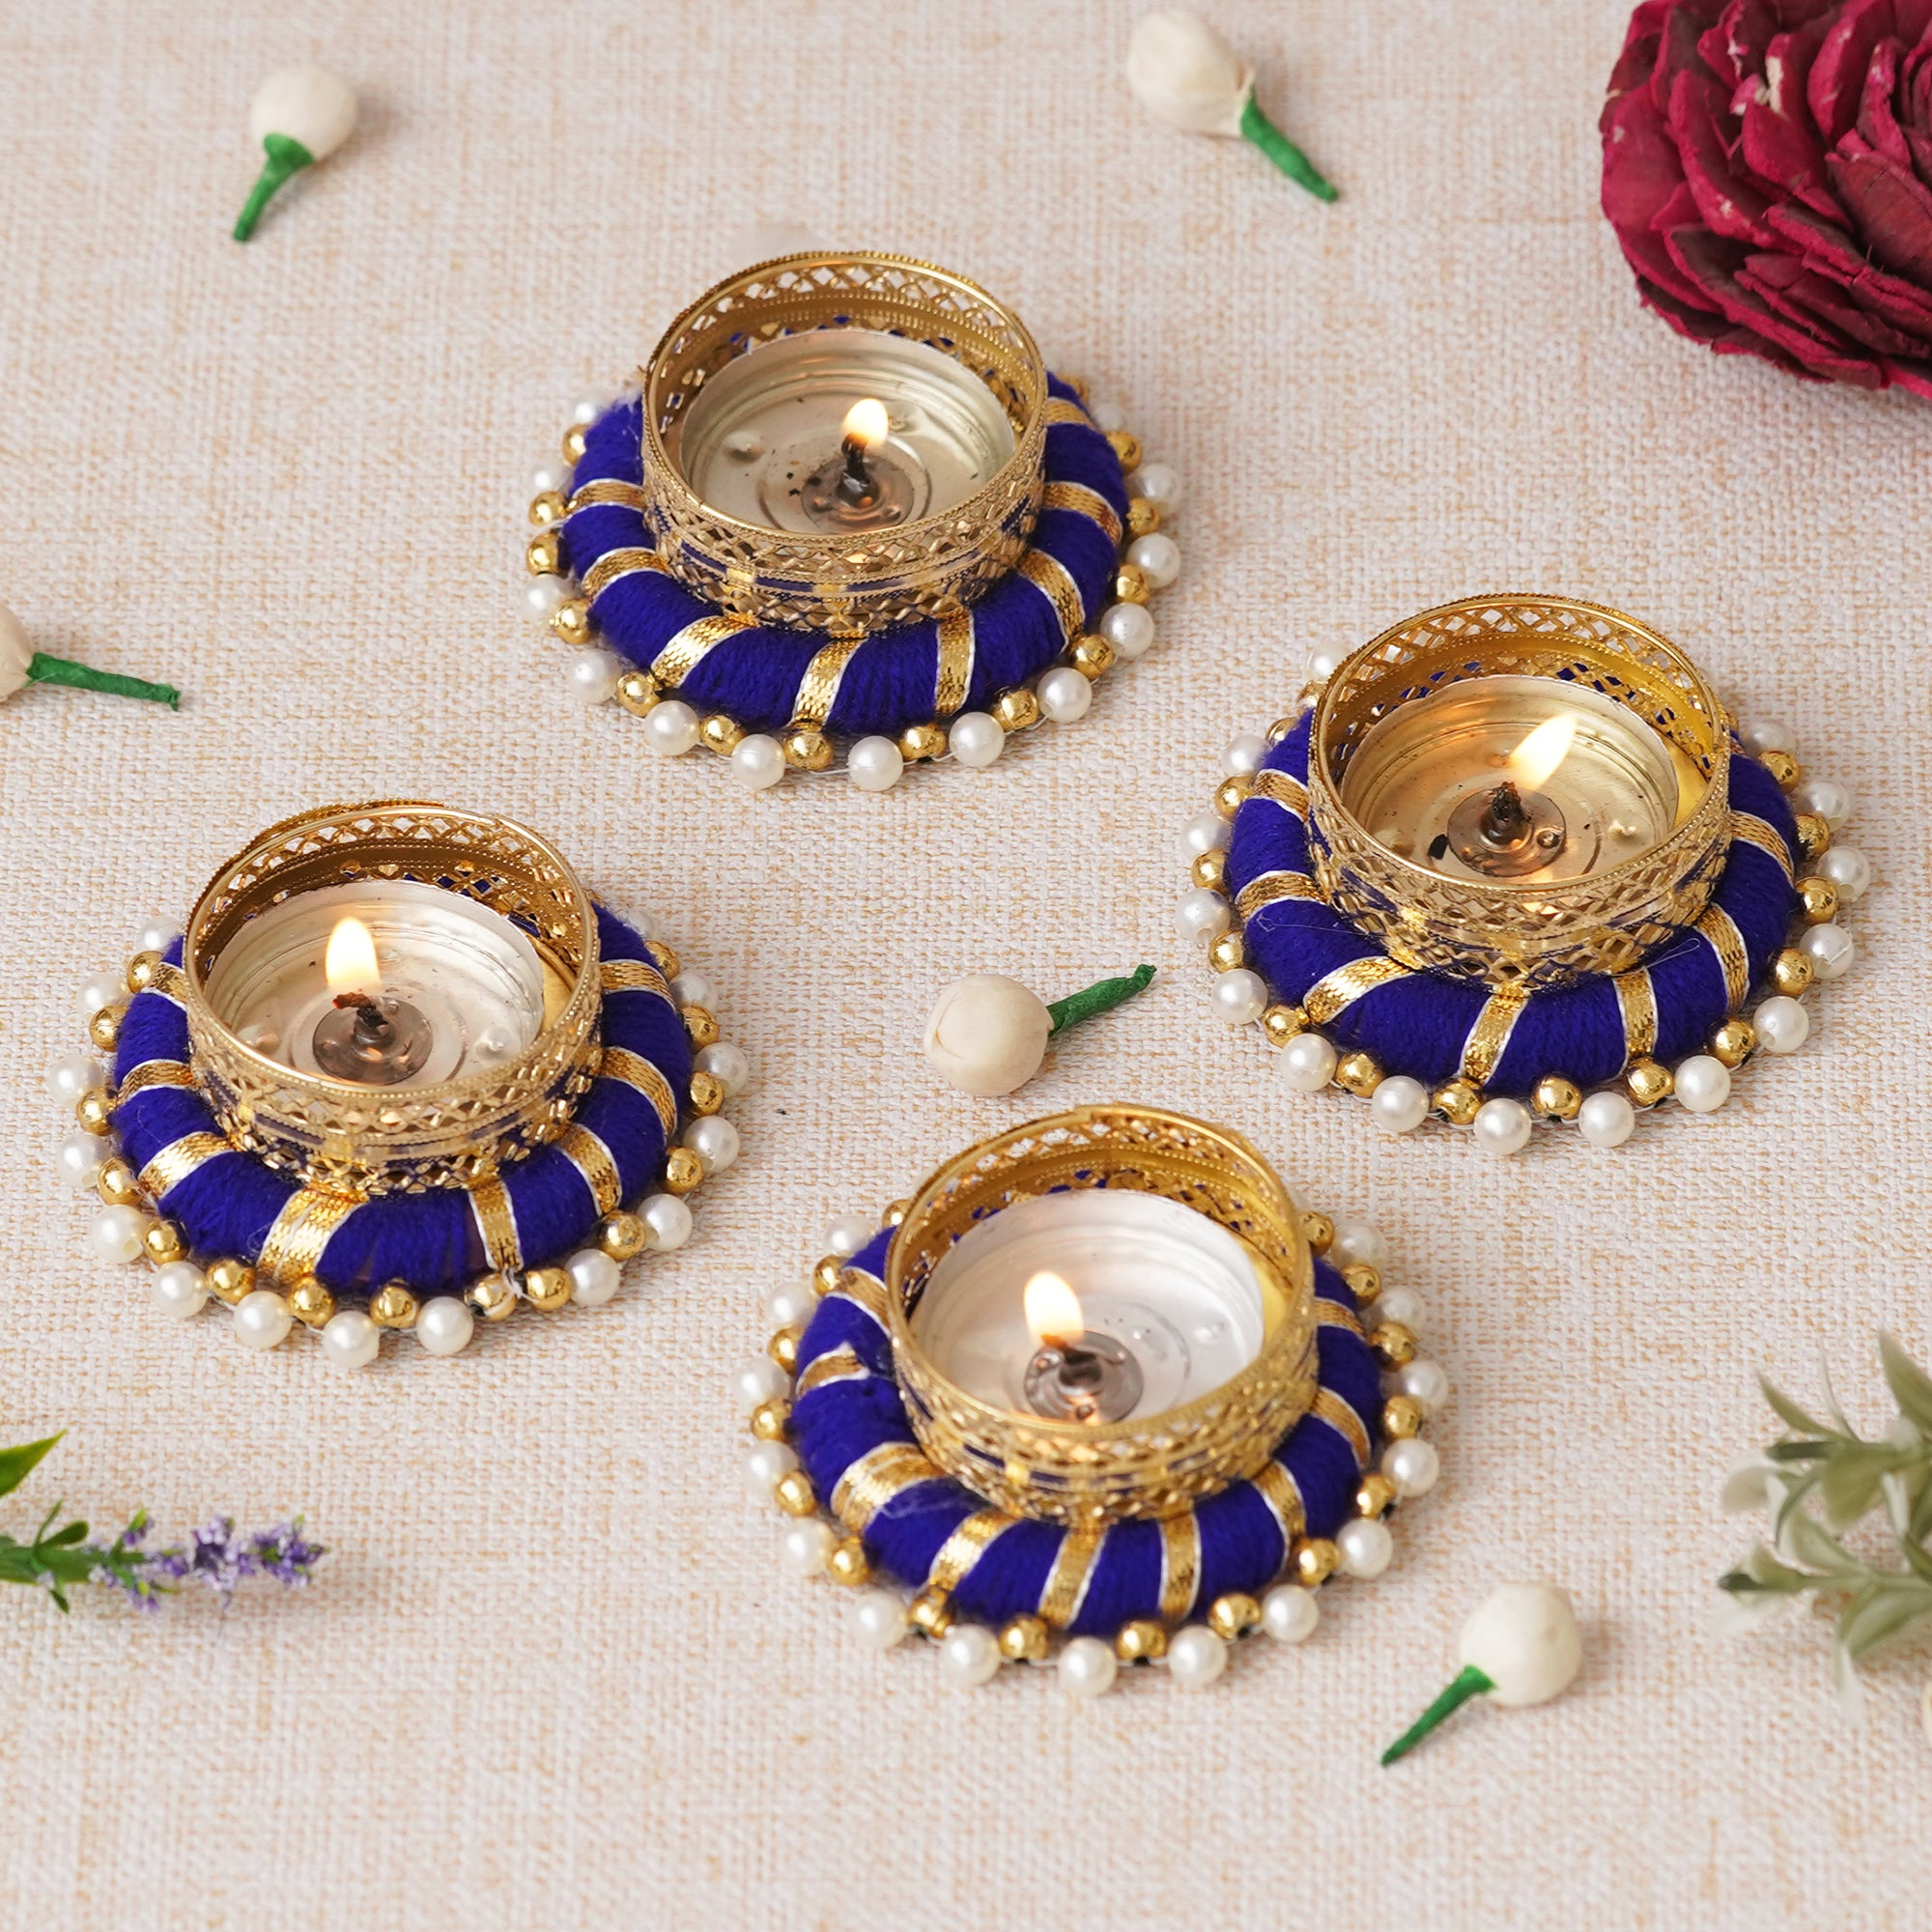 eCraftIndia Set of 4 Golden and Blue Round Shaped Beaded Decorative Tea Light Candle Holders 1